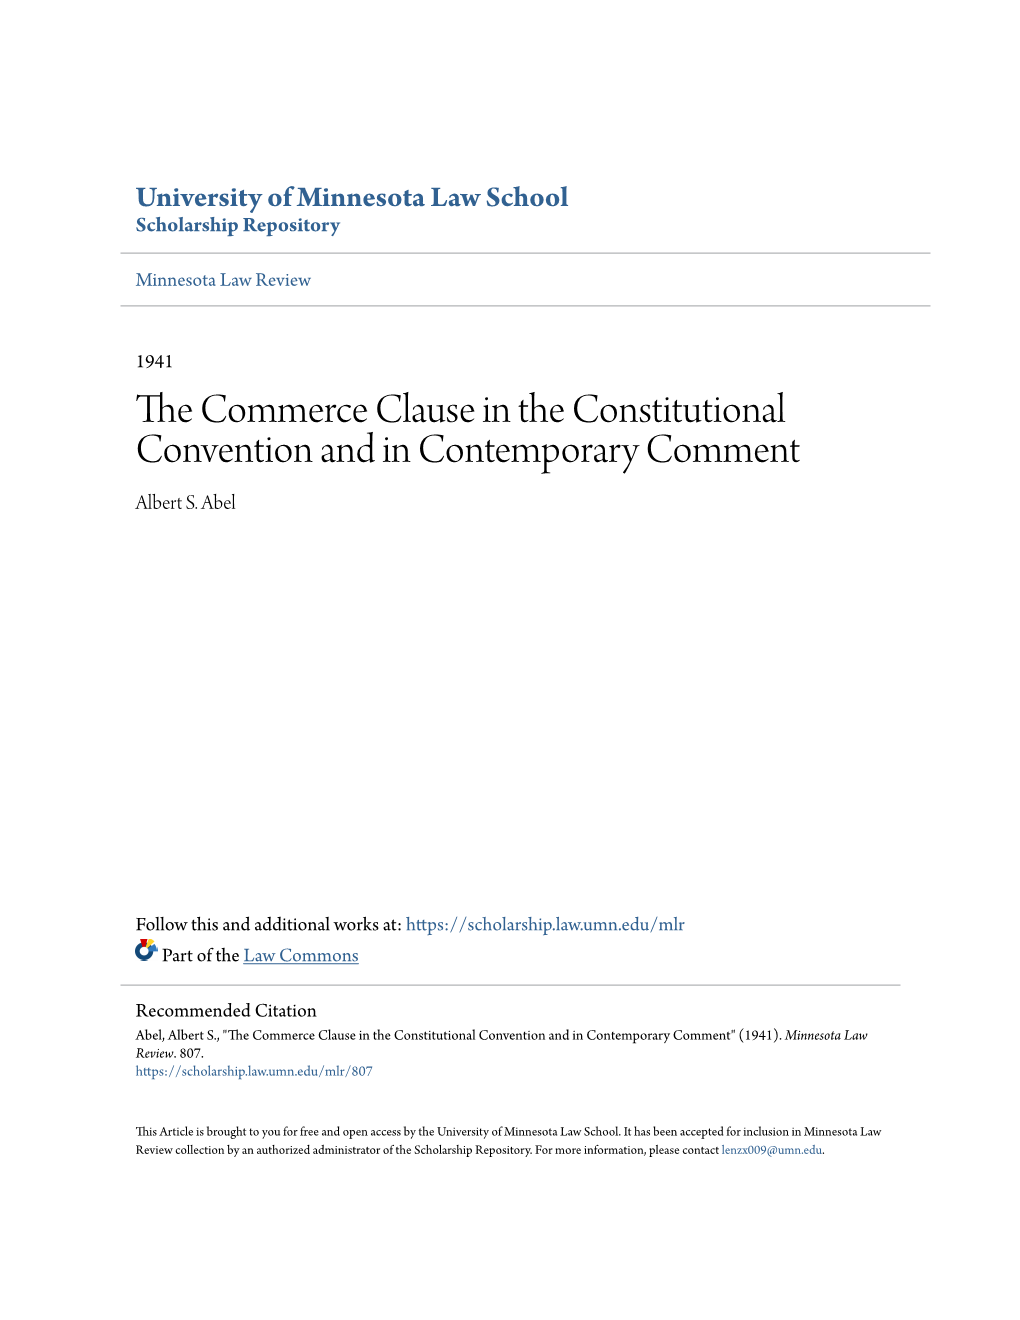 The Commerce Clause in the Constitutional Convention and in Contemporary Comment